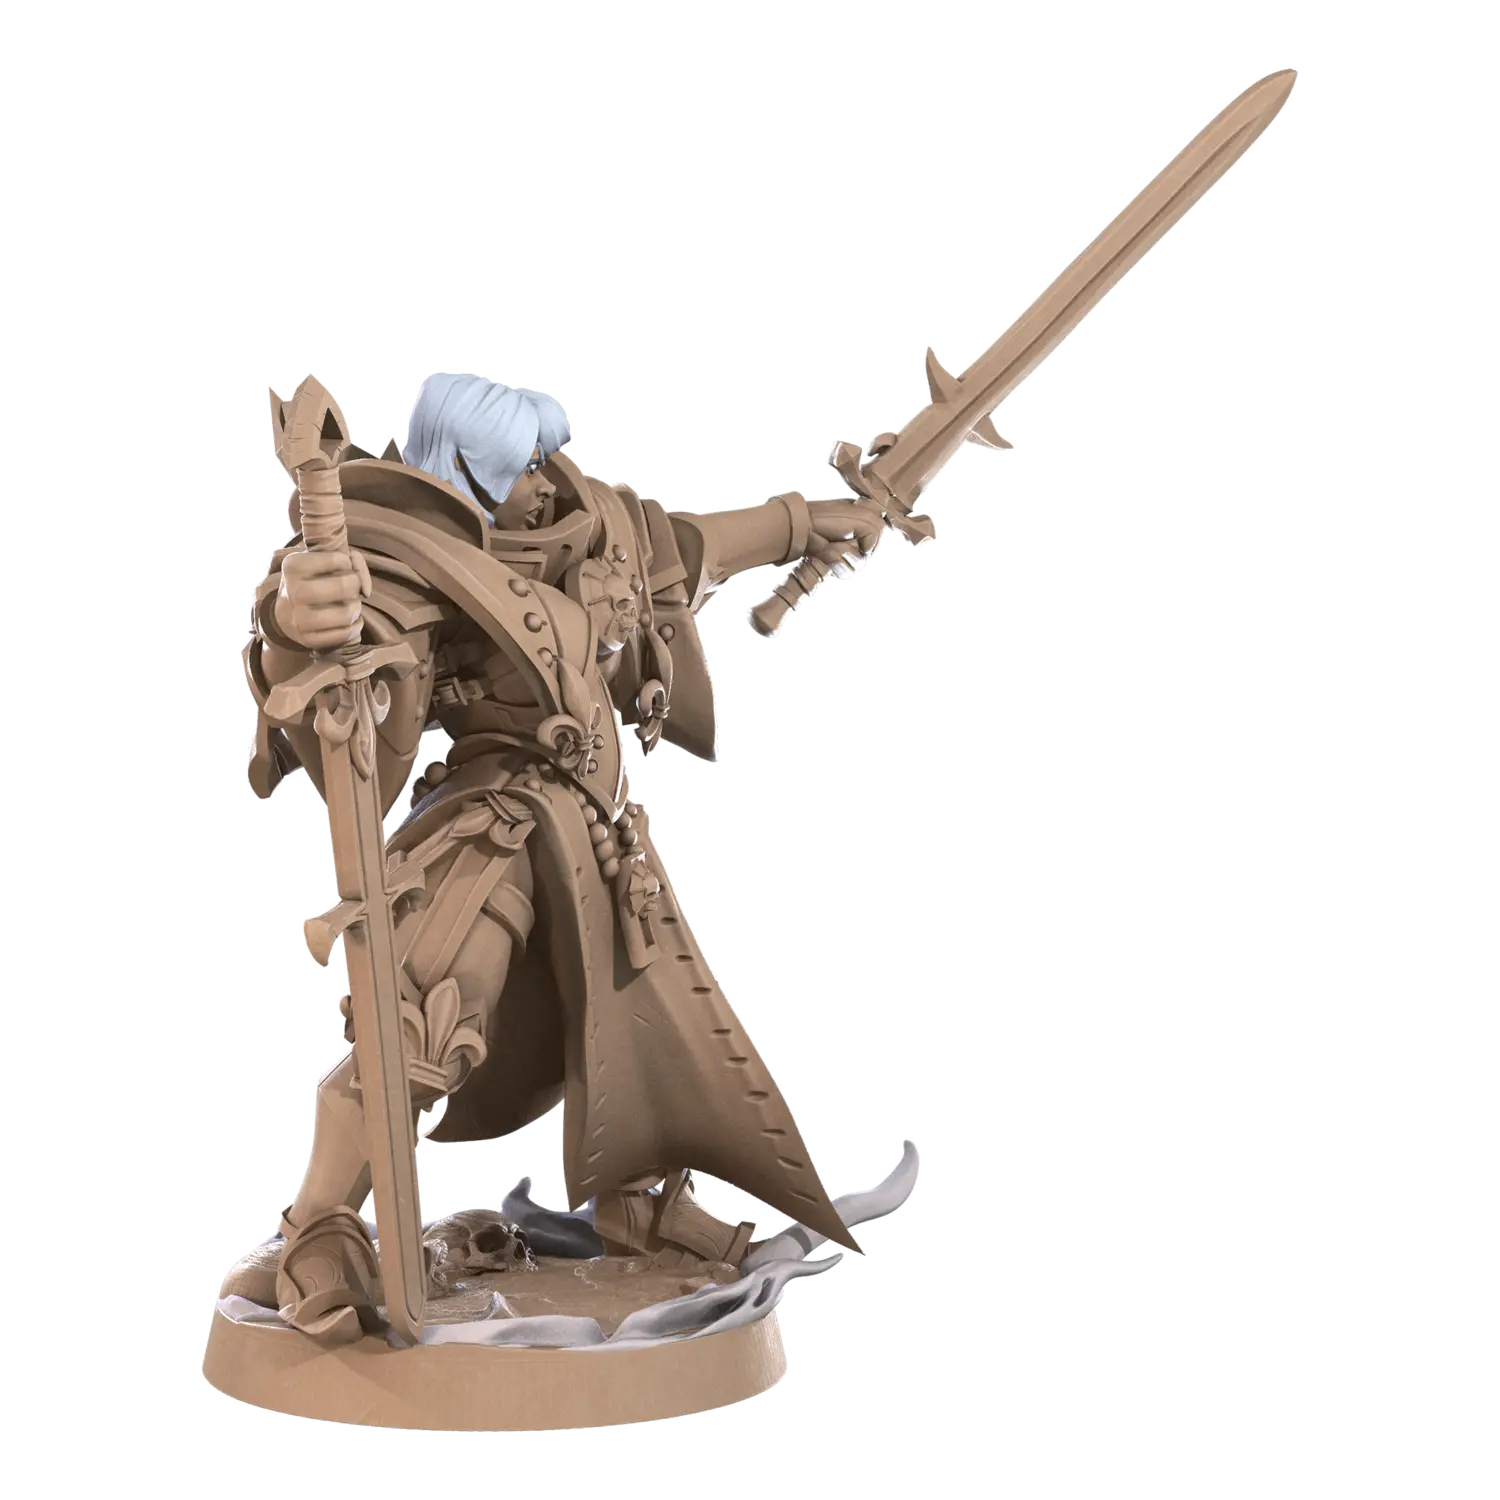 DnD Battle Sisters - Fighter - Human - Miniature - Paladin Elara 01 Battle Sisters - Fighter - Human - Miniature - Paladin sold by DoubleHitShop